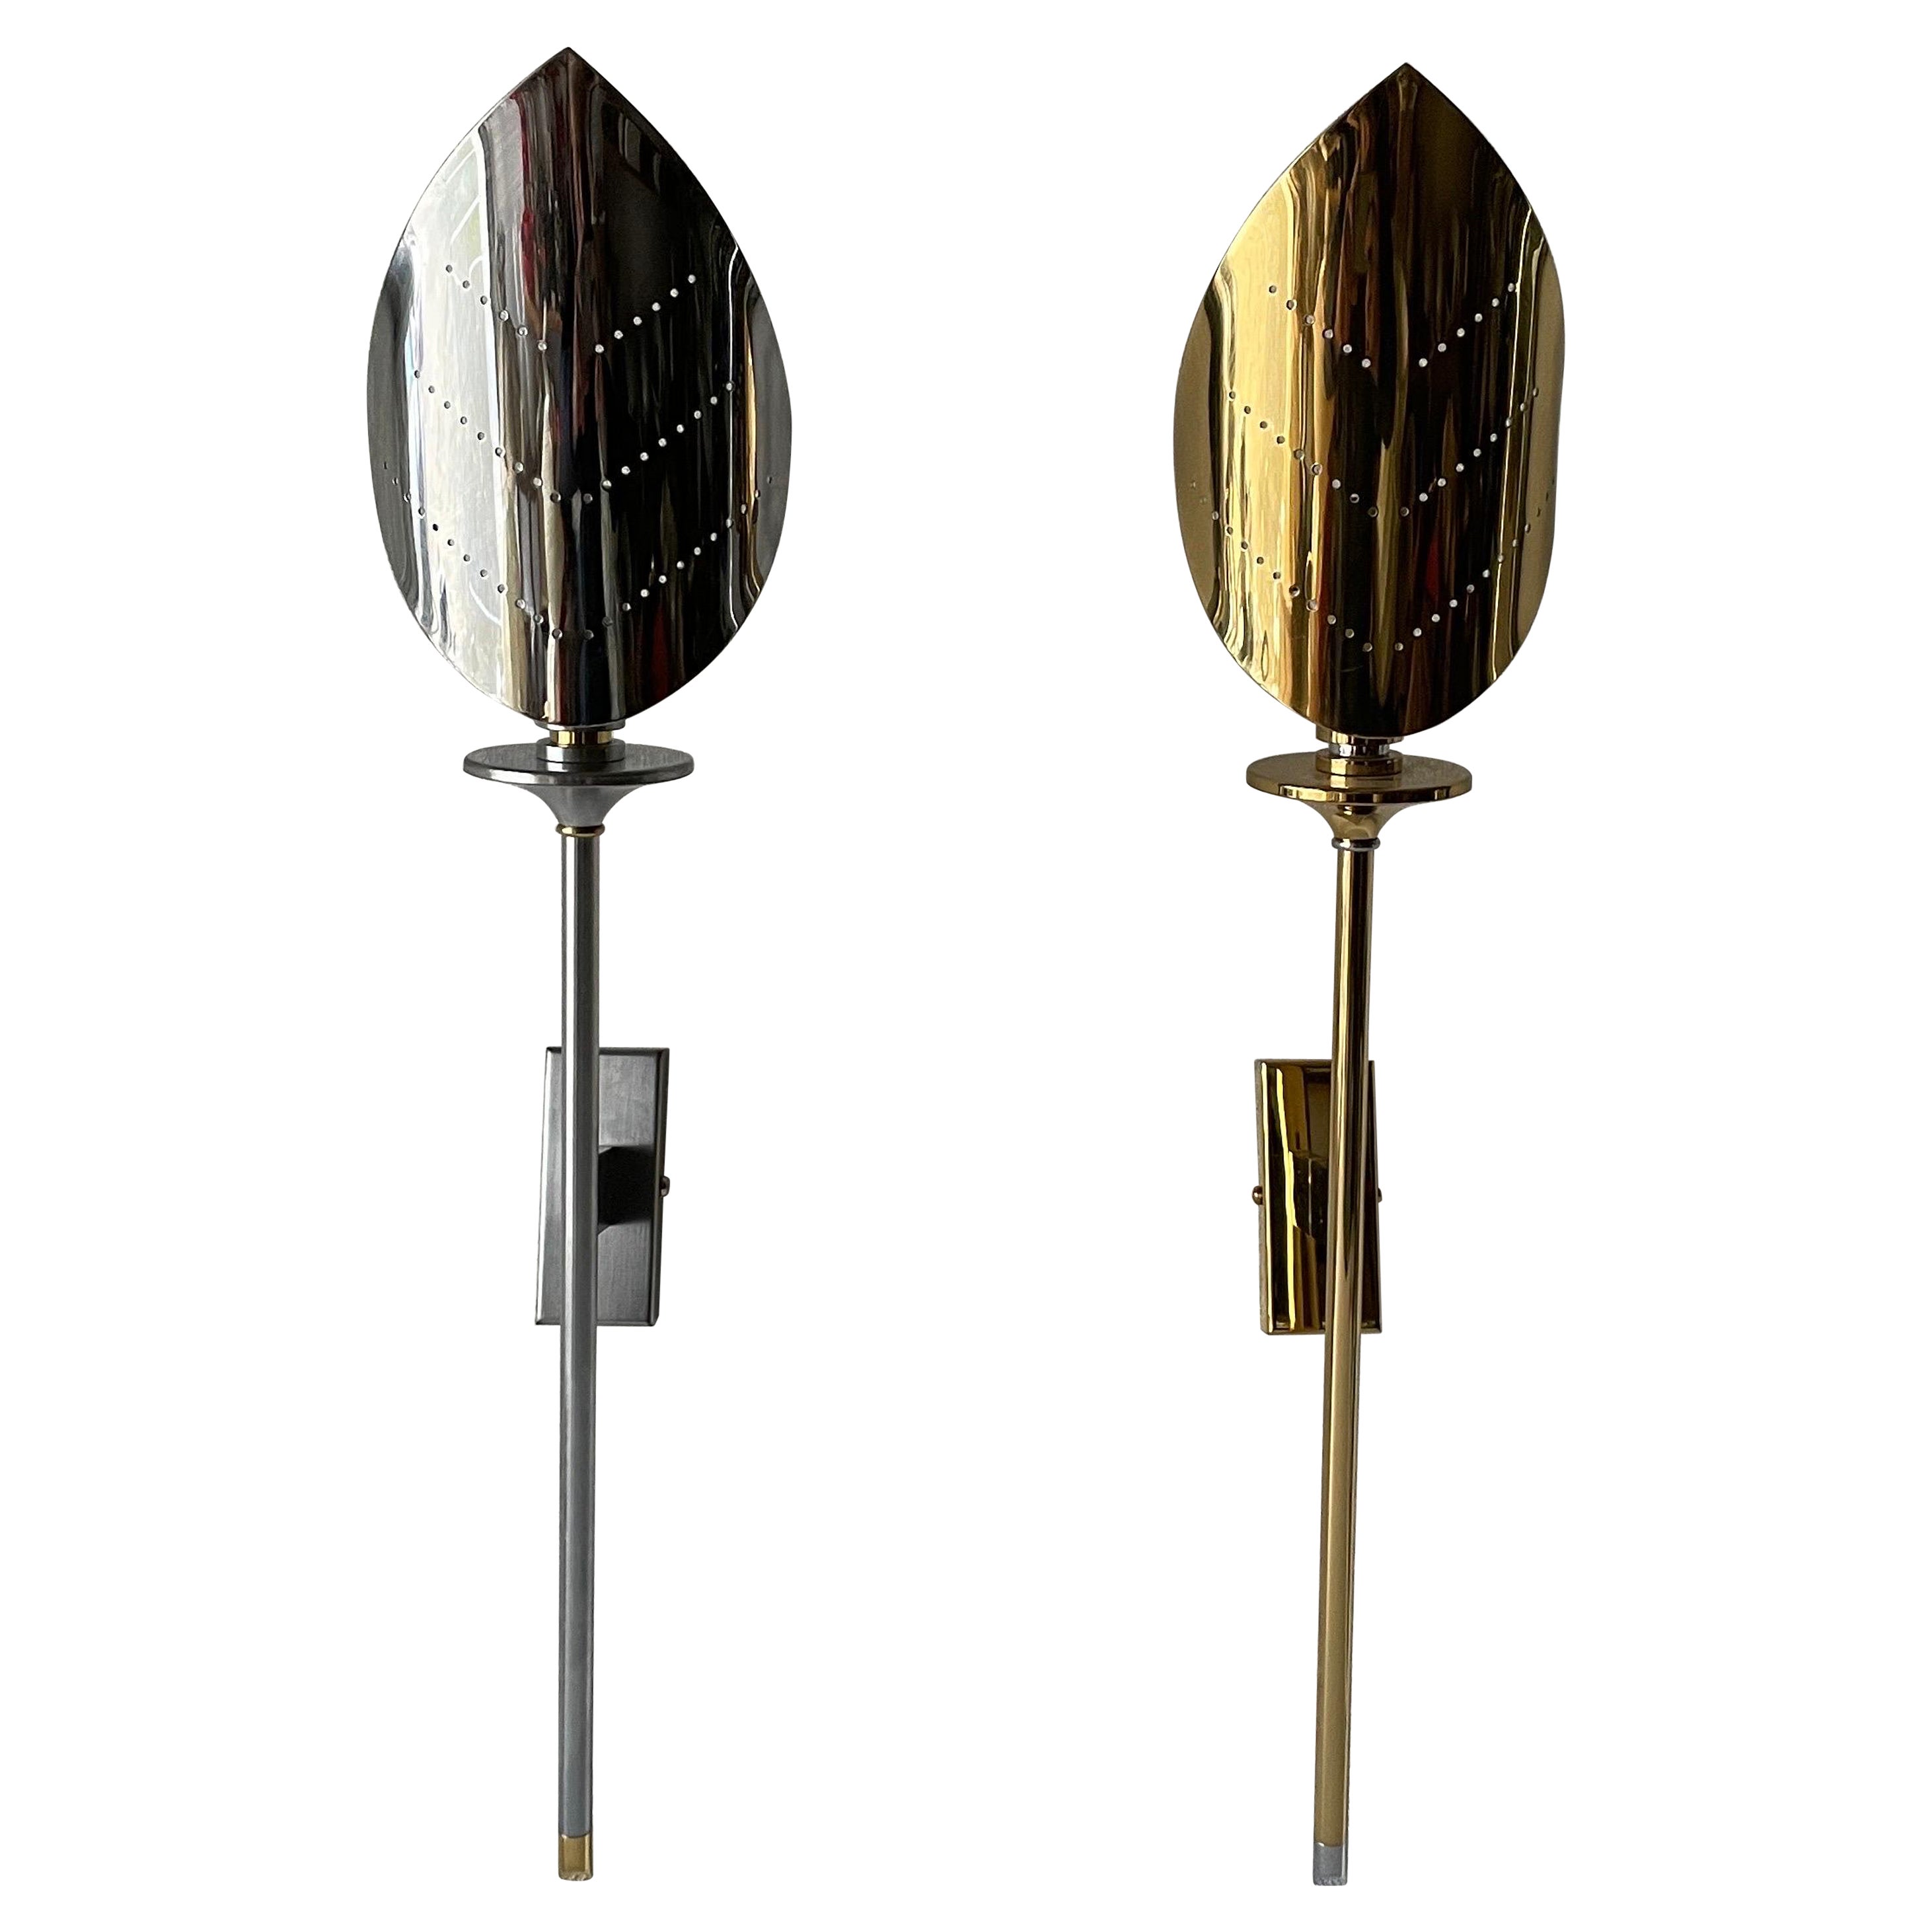 Leaf Shaped Gold and Chrome Pair of Sconces by Baulmann Leuchten, 1980s, Germany For Sale